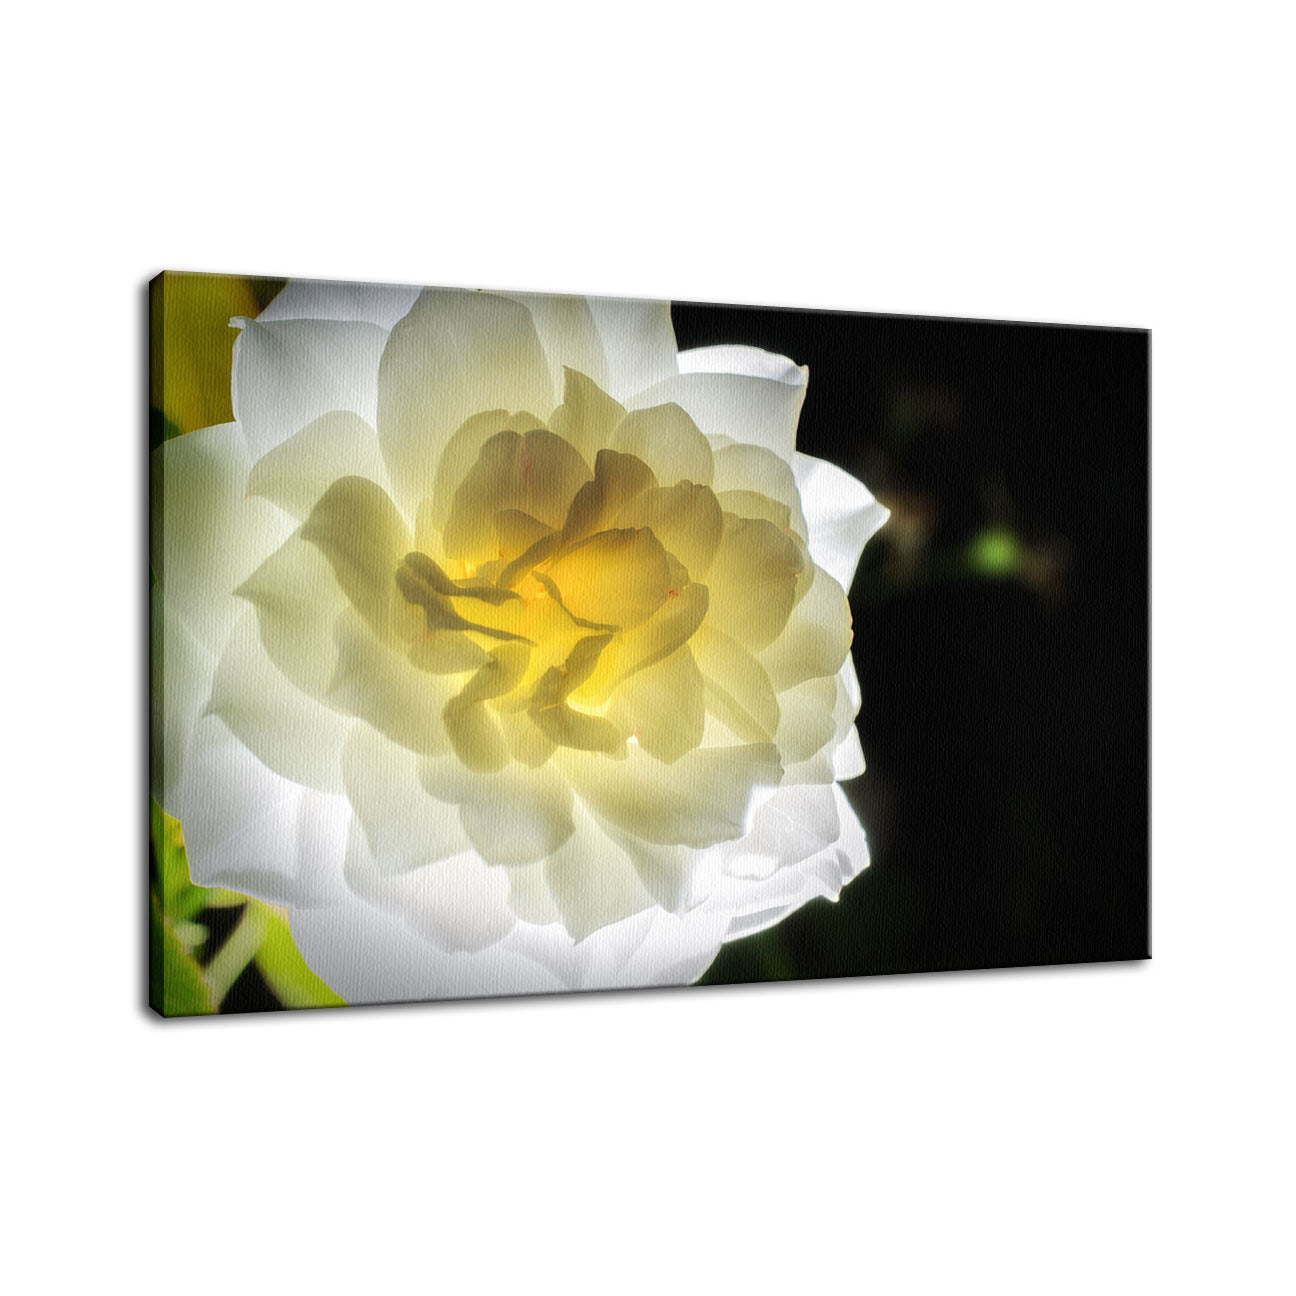 Glowing Rose 2 Nature / Floral Photo Fine Art Canvas Wall Art Prints  - PIPAFINEART